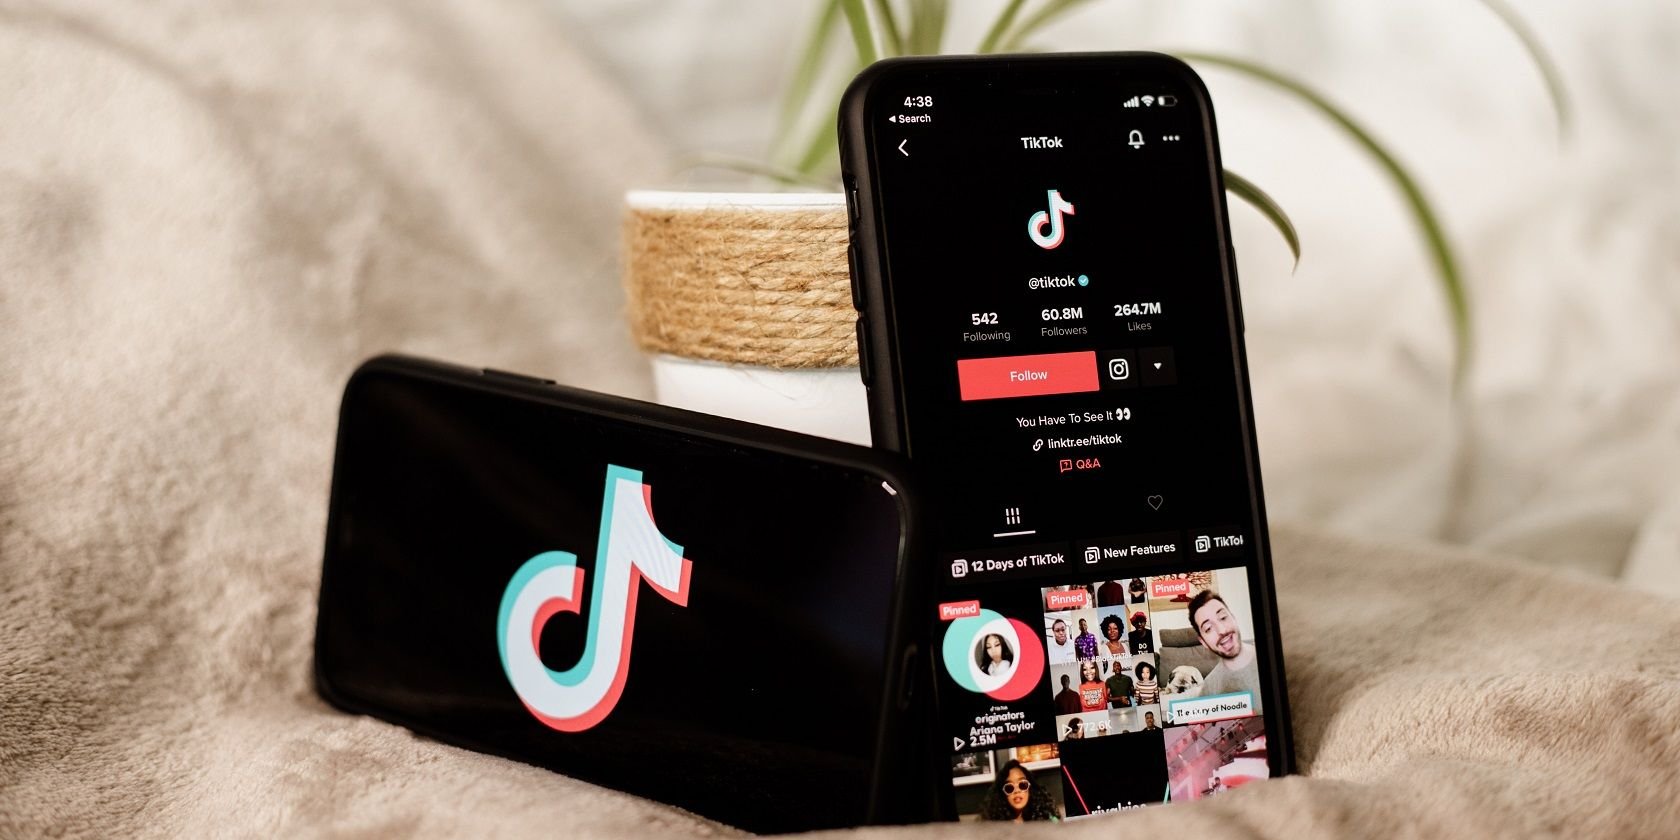 8 Incredible DIY Ideas to Amuse Your TikTok and Instagram Followers